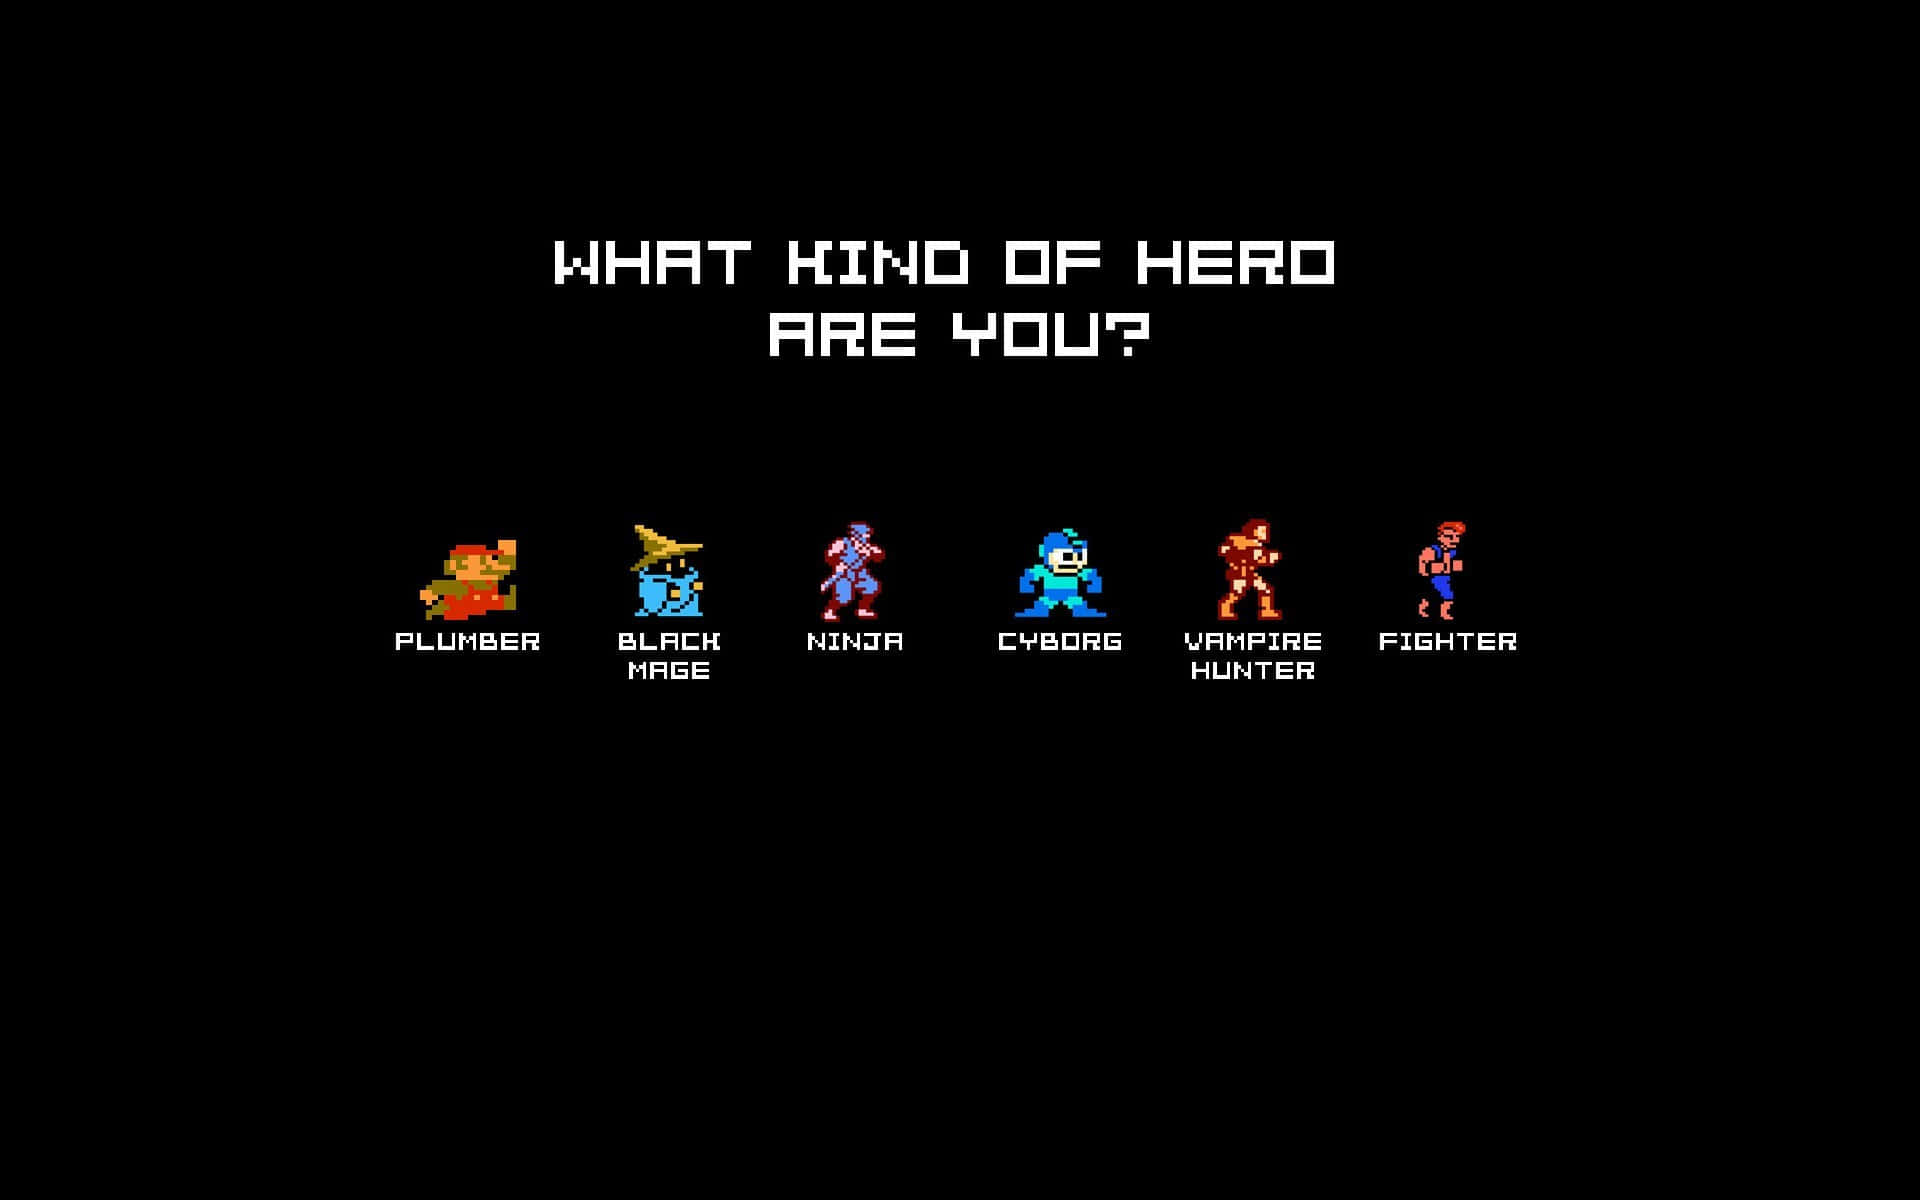 What King Of Hero Are You? Wallpaper